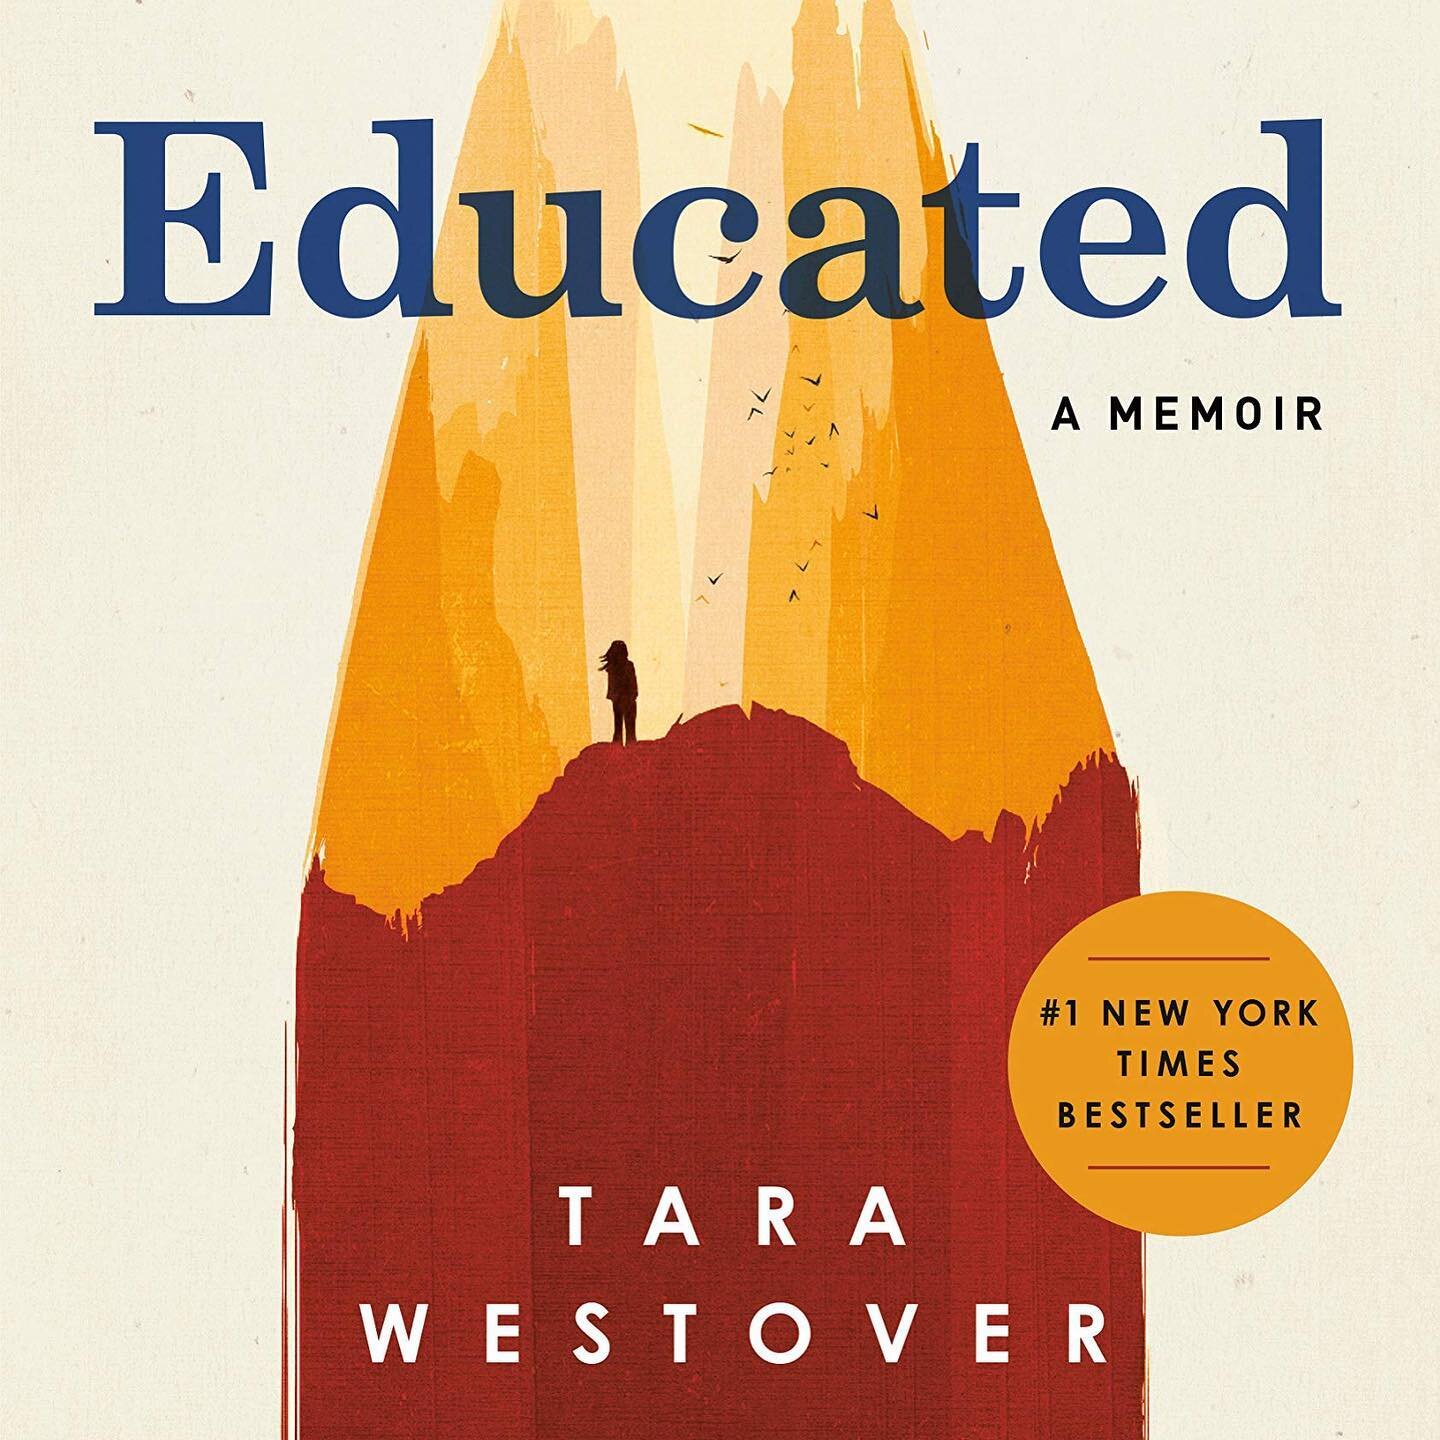 🗓 2/17/2019
📖 Educated: A Memoir by Tara Westover
Tara Westover lives in my neighborhood. She&rsquo;s just another blonde woman, walking by. A reminder that you have no idea what the lady in front of you, getting bagels, has overcome.
Also - her en